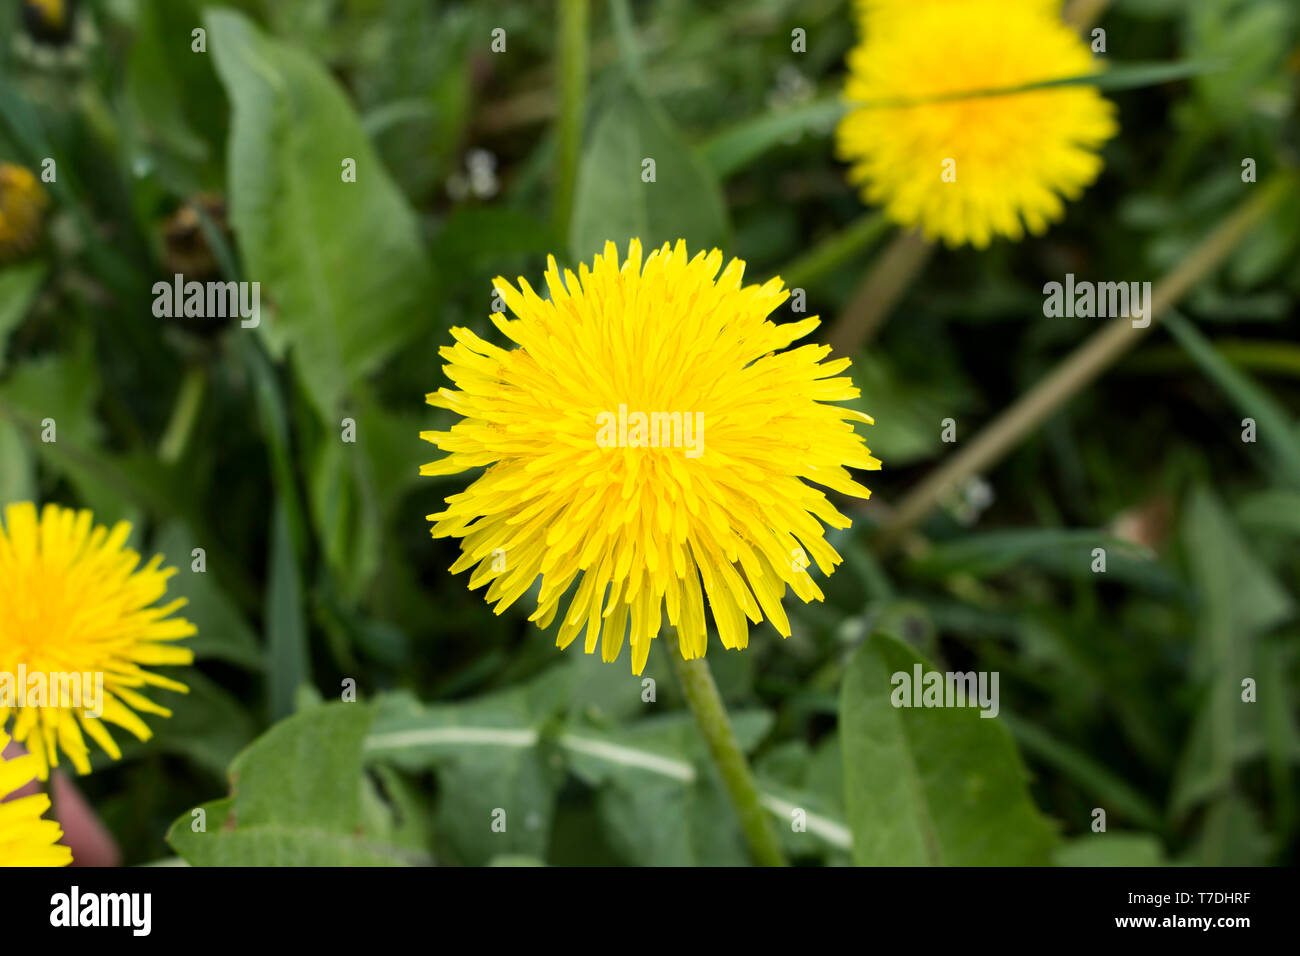 Dandelions macro. Blossom time. Green grass. Spring flowers in the wild nature. Stock Photo